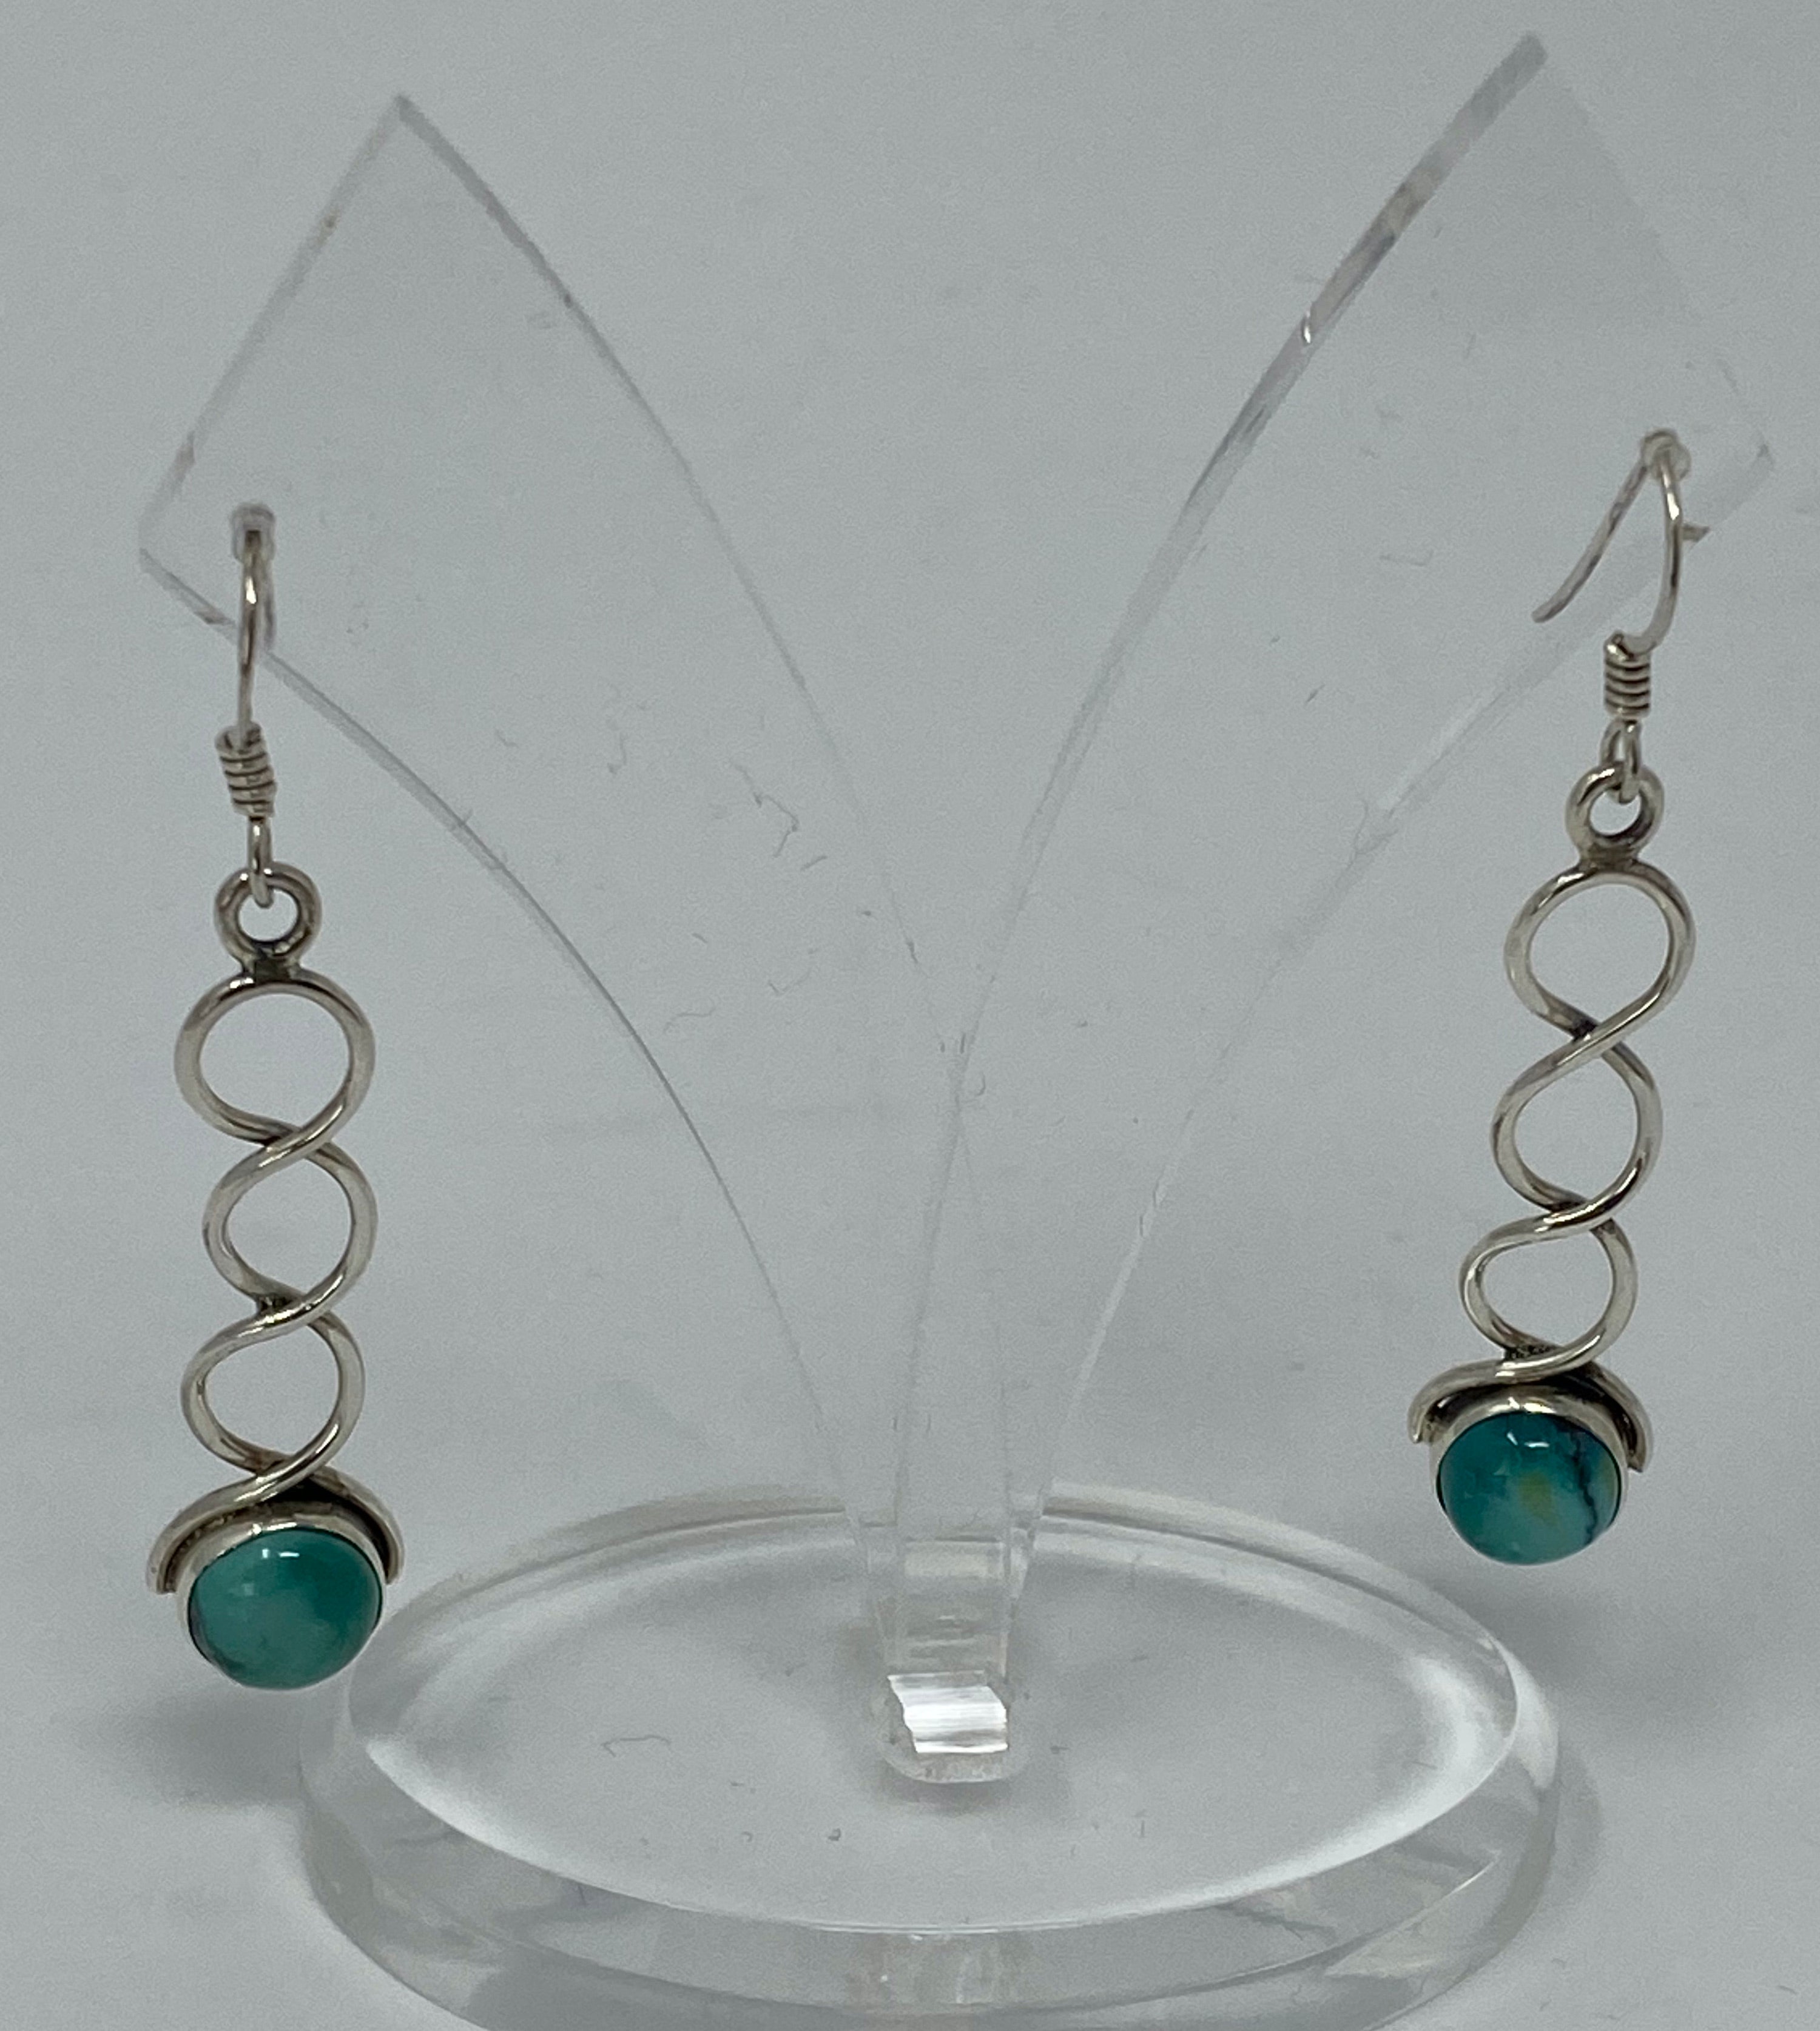 Silver and Natural Turquoise Earrings